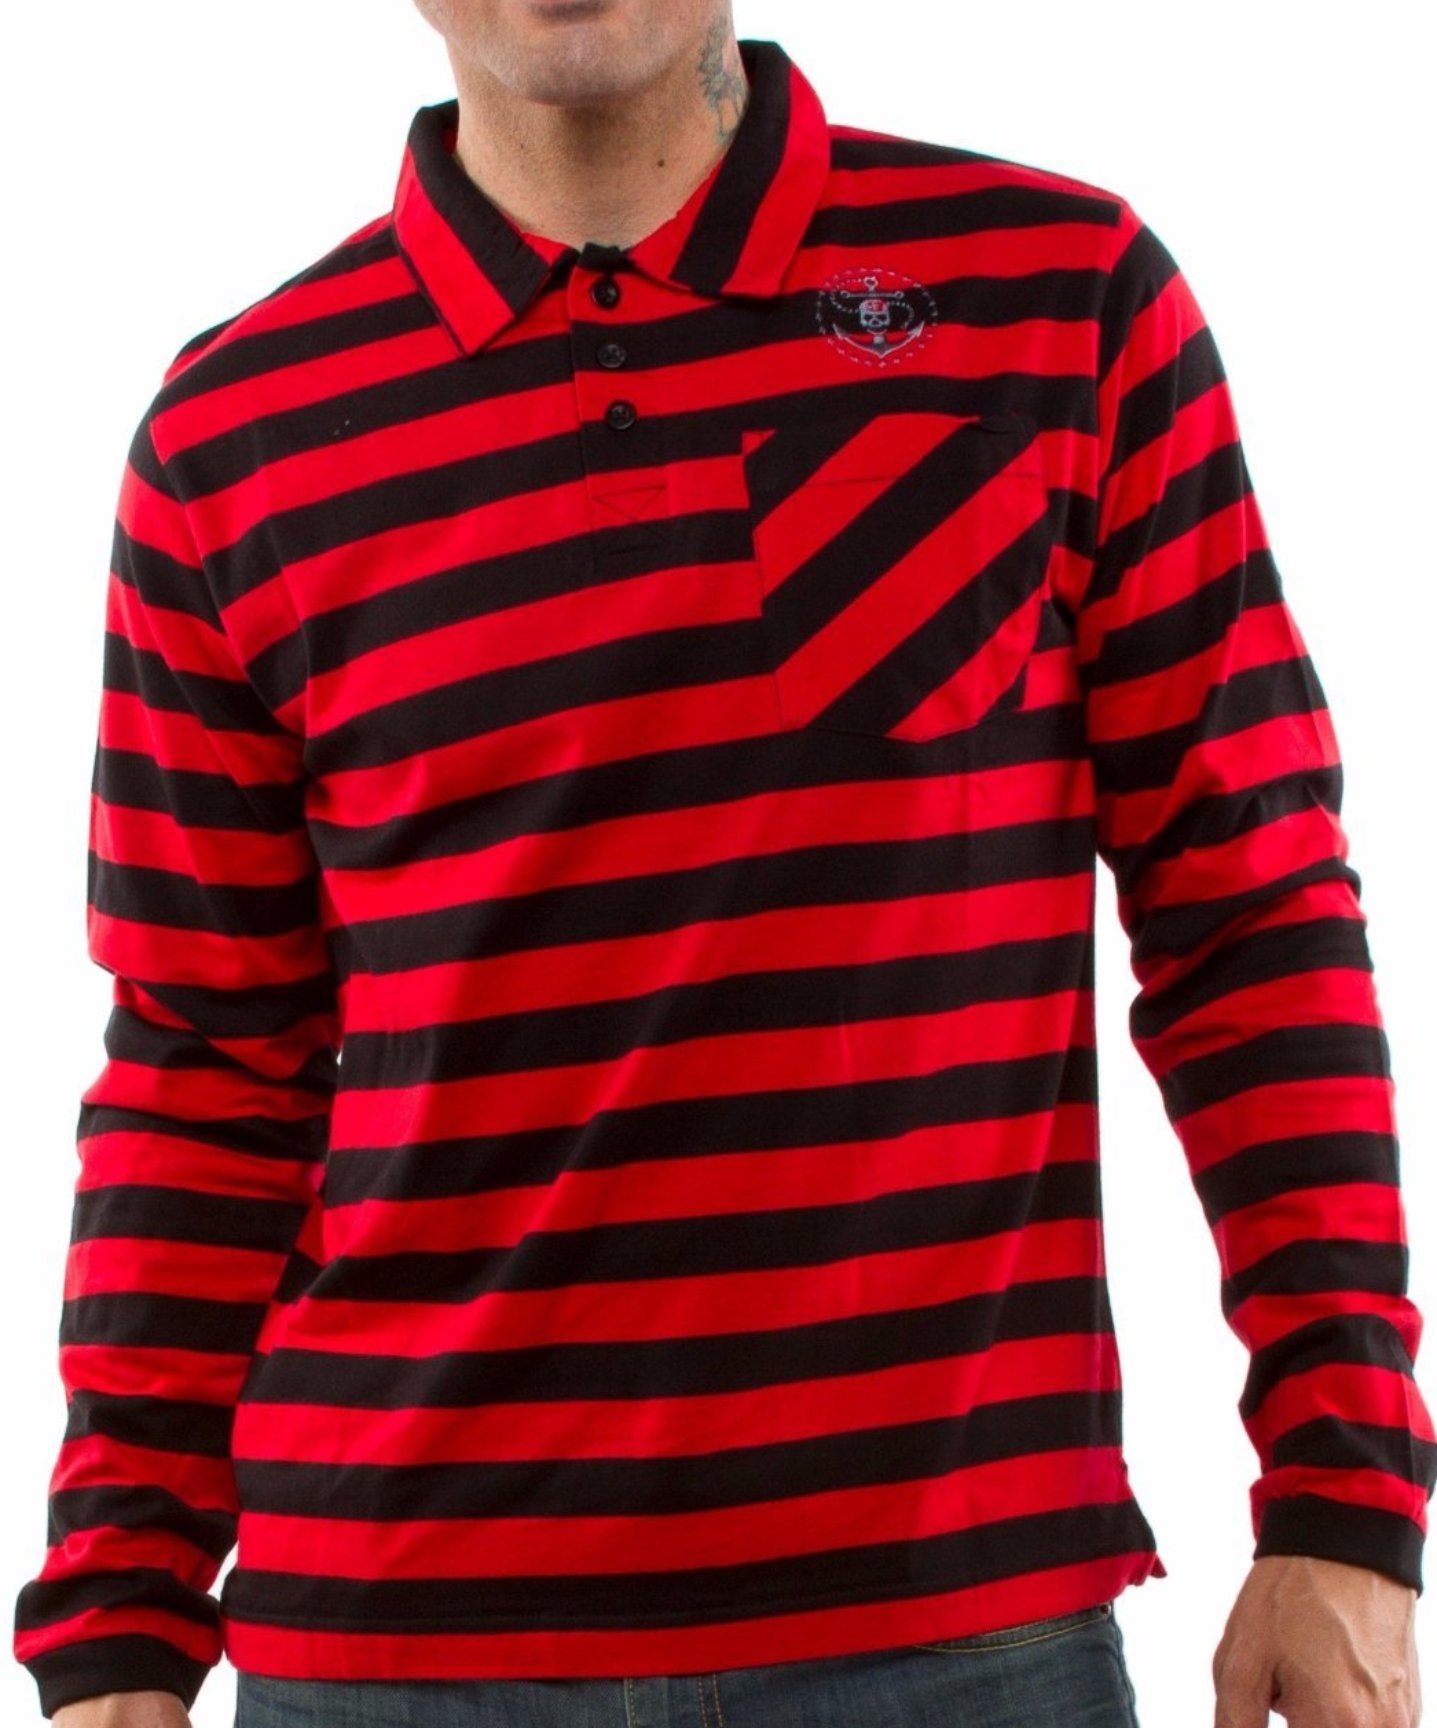 The PRISON BOUND Long Sleeve Striped Polo - BLACK & RED